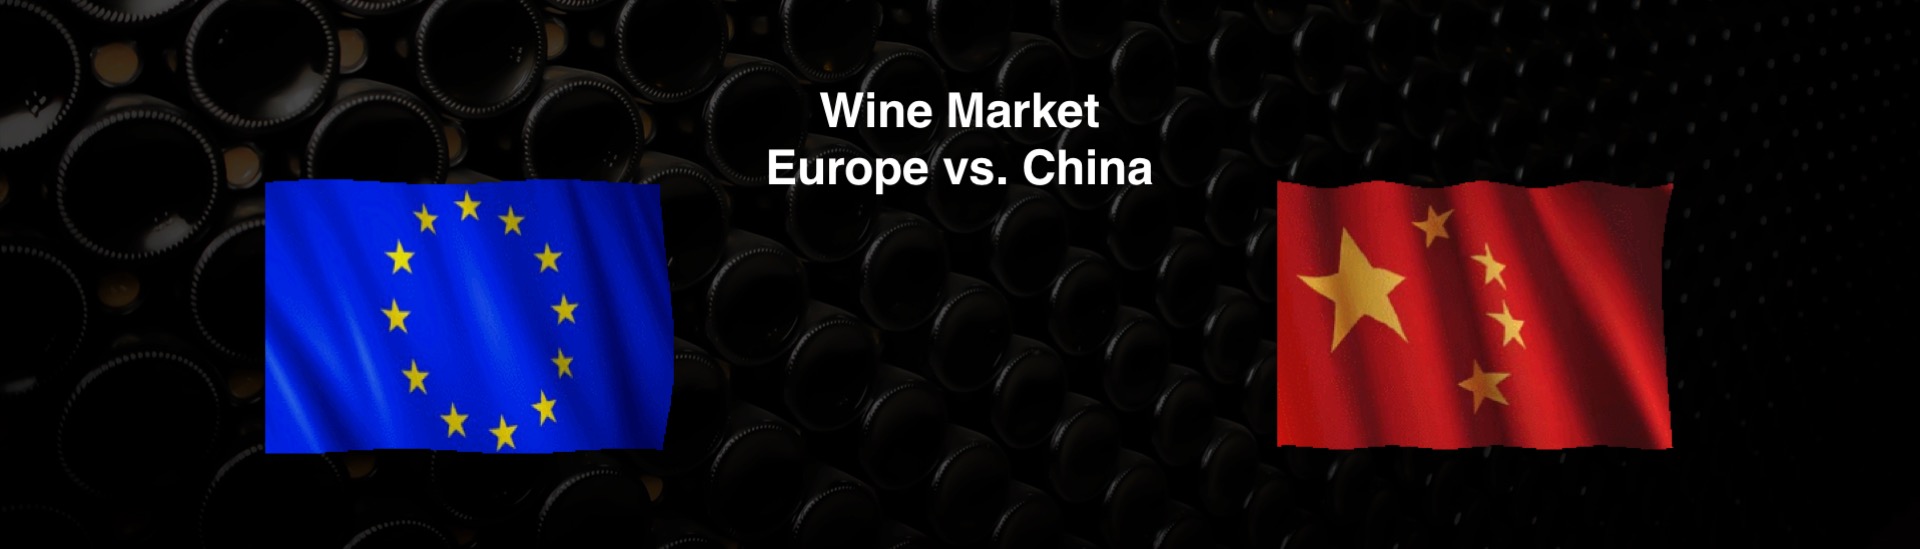  HOW WE BUILD A WINEBRAND         IN CHINA